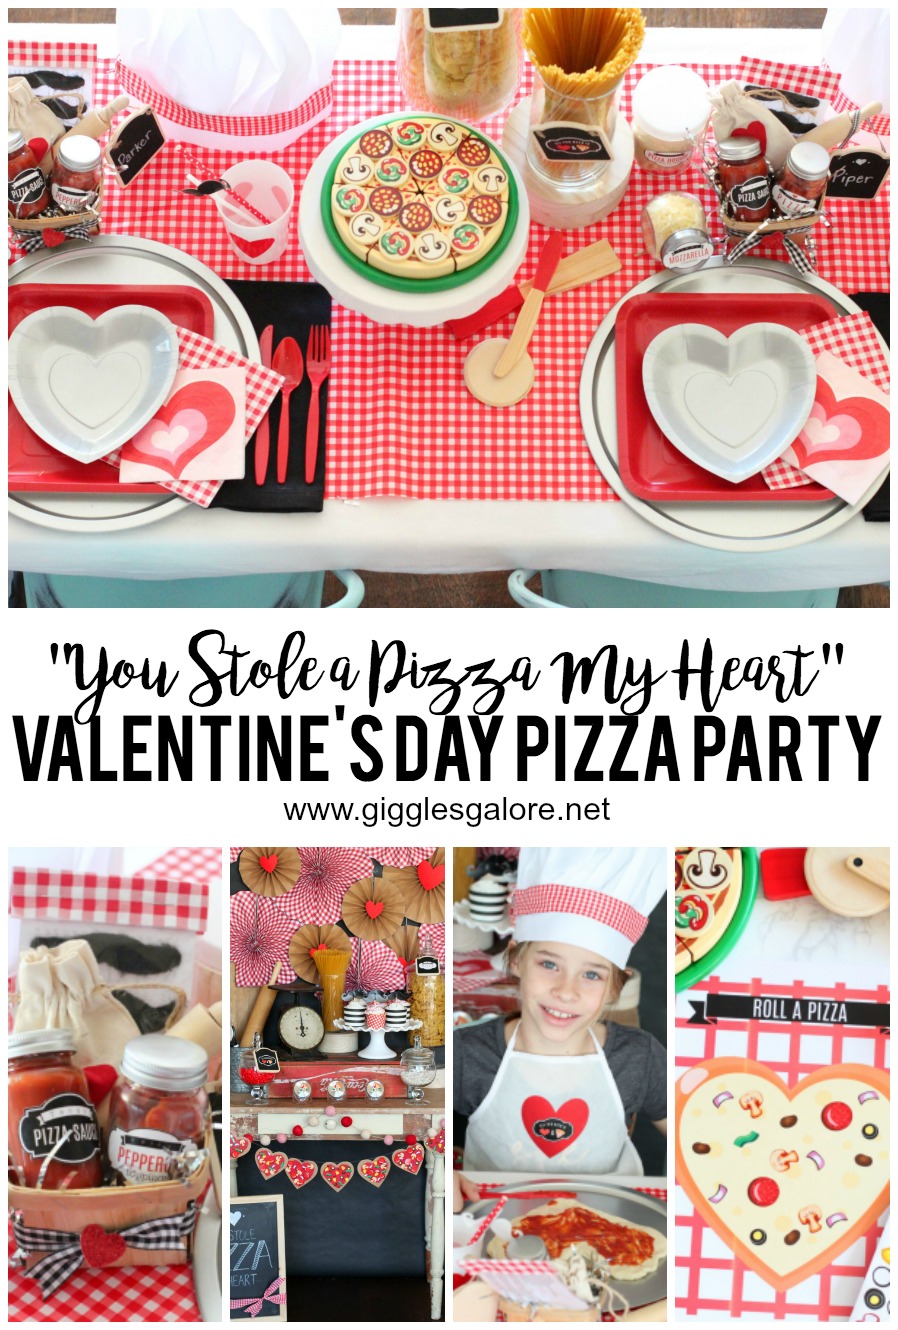 "You Stole a Pizza My Heart" Valentine's Day Pizza Party - Giggles Galore